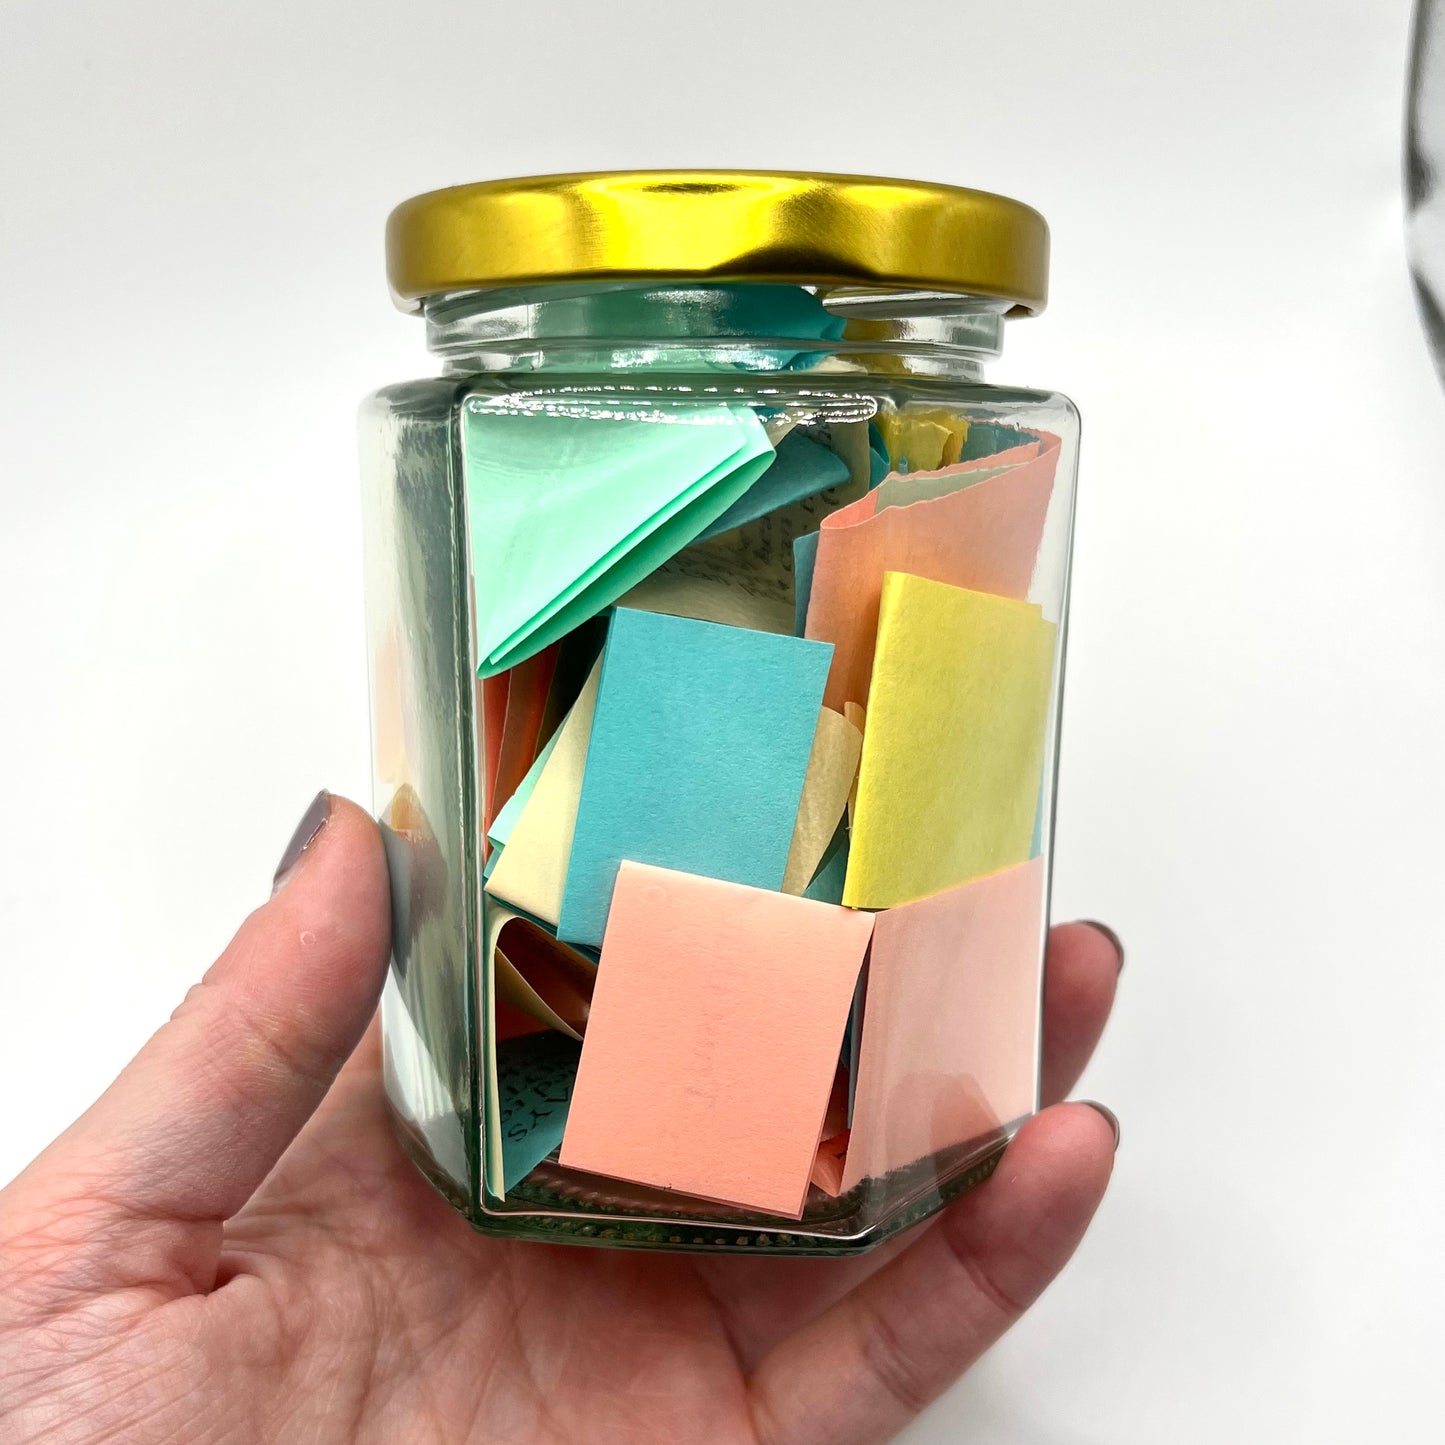 Encouragement Jar for the Wife in Season: 50 Days of Biblical Encouragement for the Coach's Wife